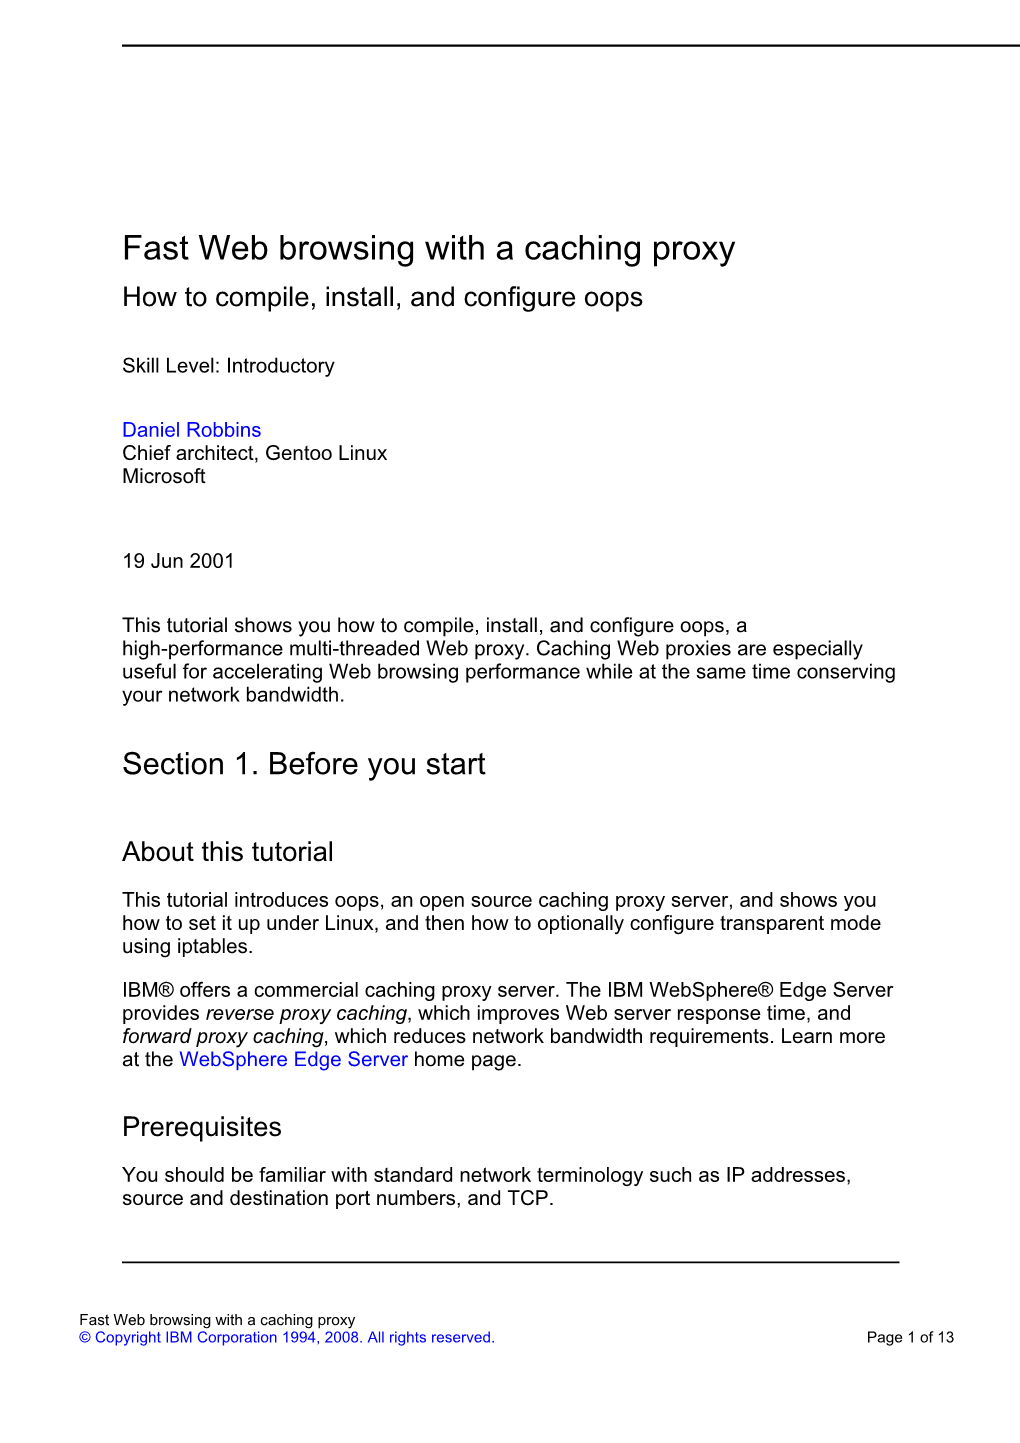 Fast Web Browsing with a Caching Proxy How to Compile, Install, and Configure Oops